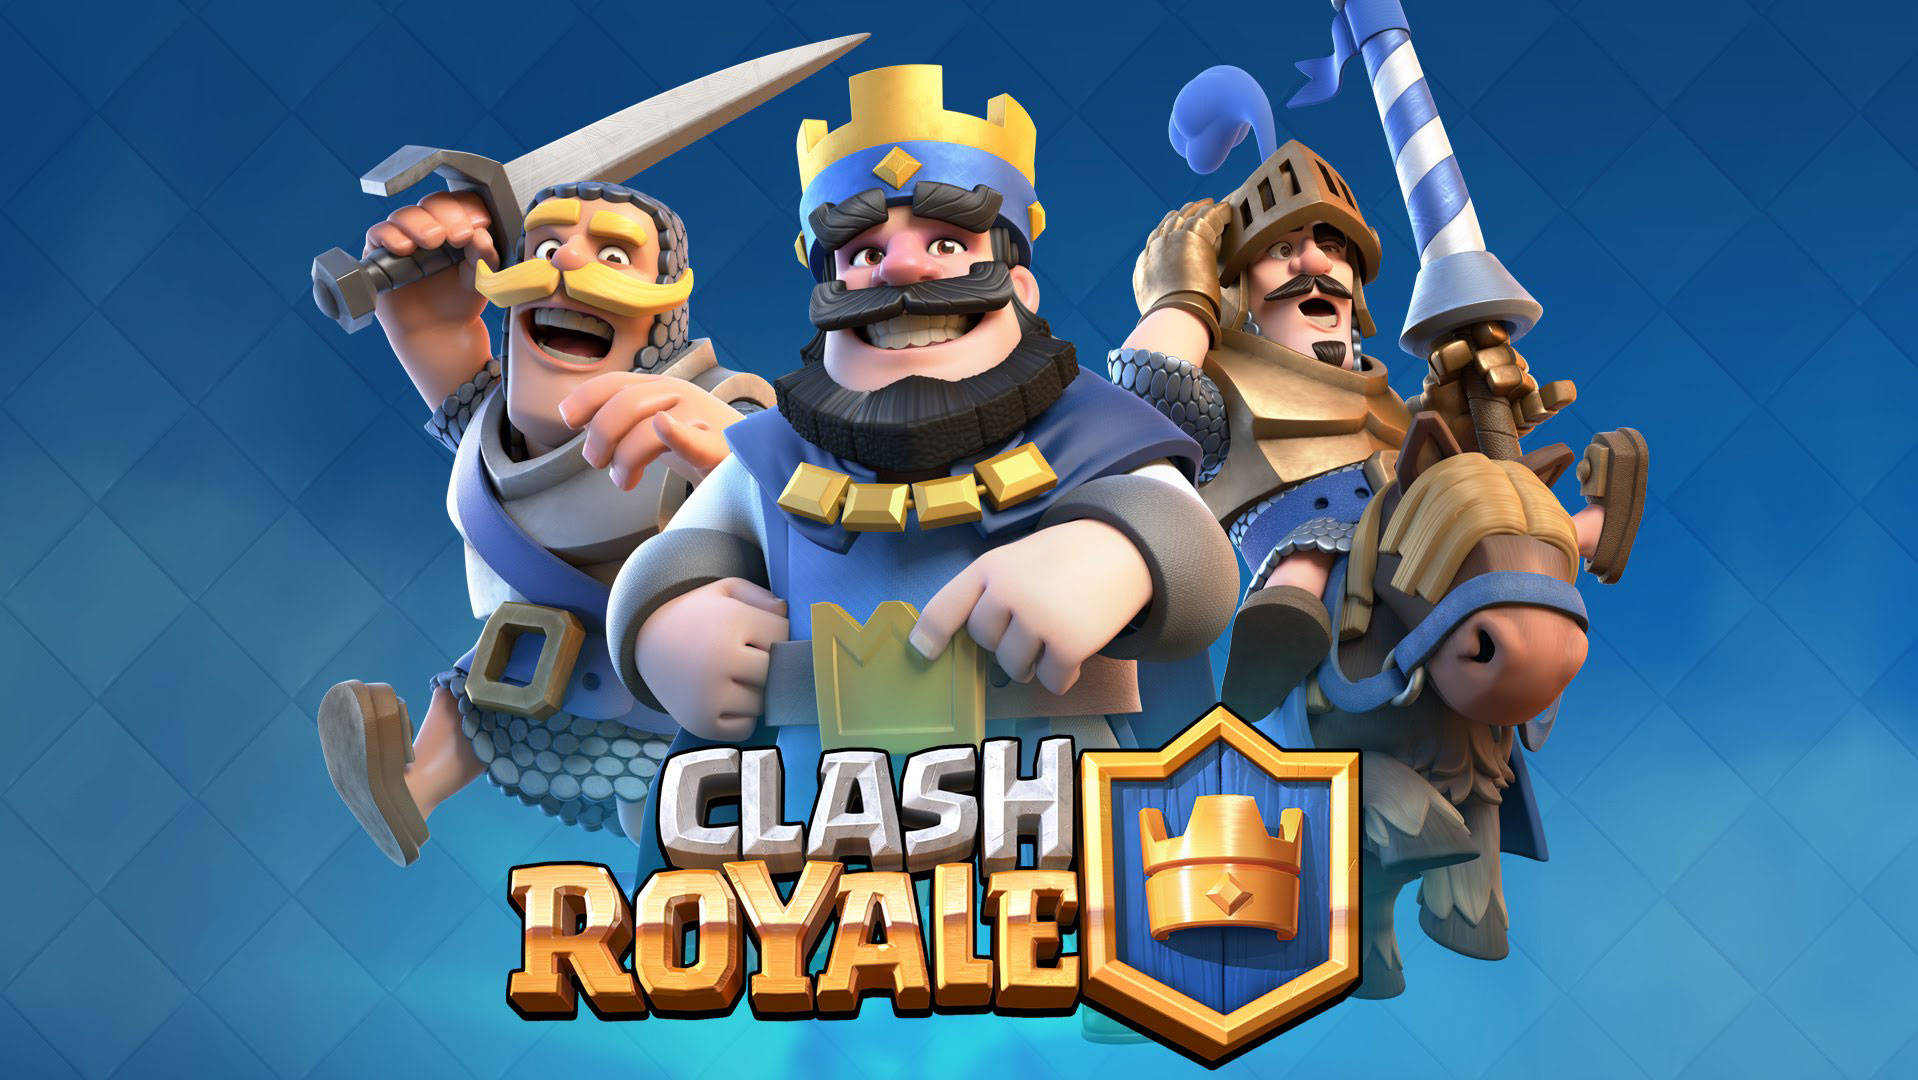 100+] Clash Royale Wallpapers 